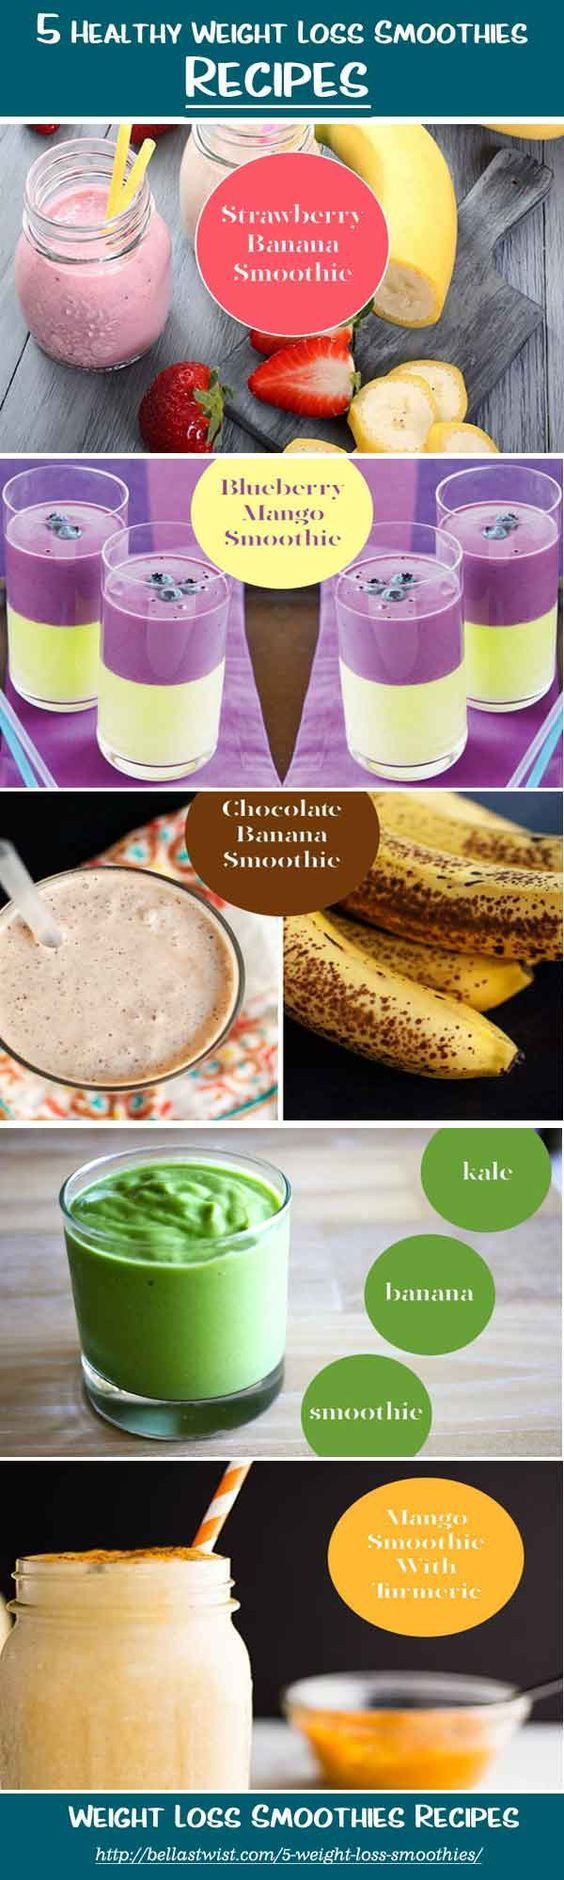 Weight Loss Smoothies For Diabetics
 Best 25 Healthy t recipes ideas on Pinterest